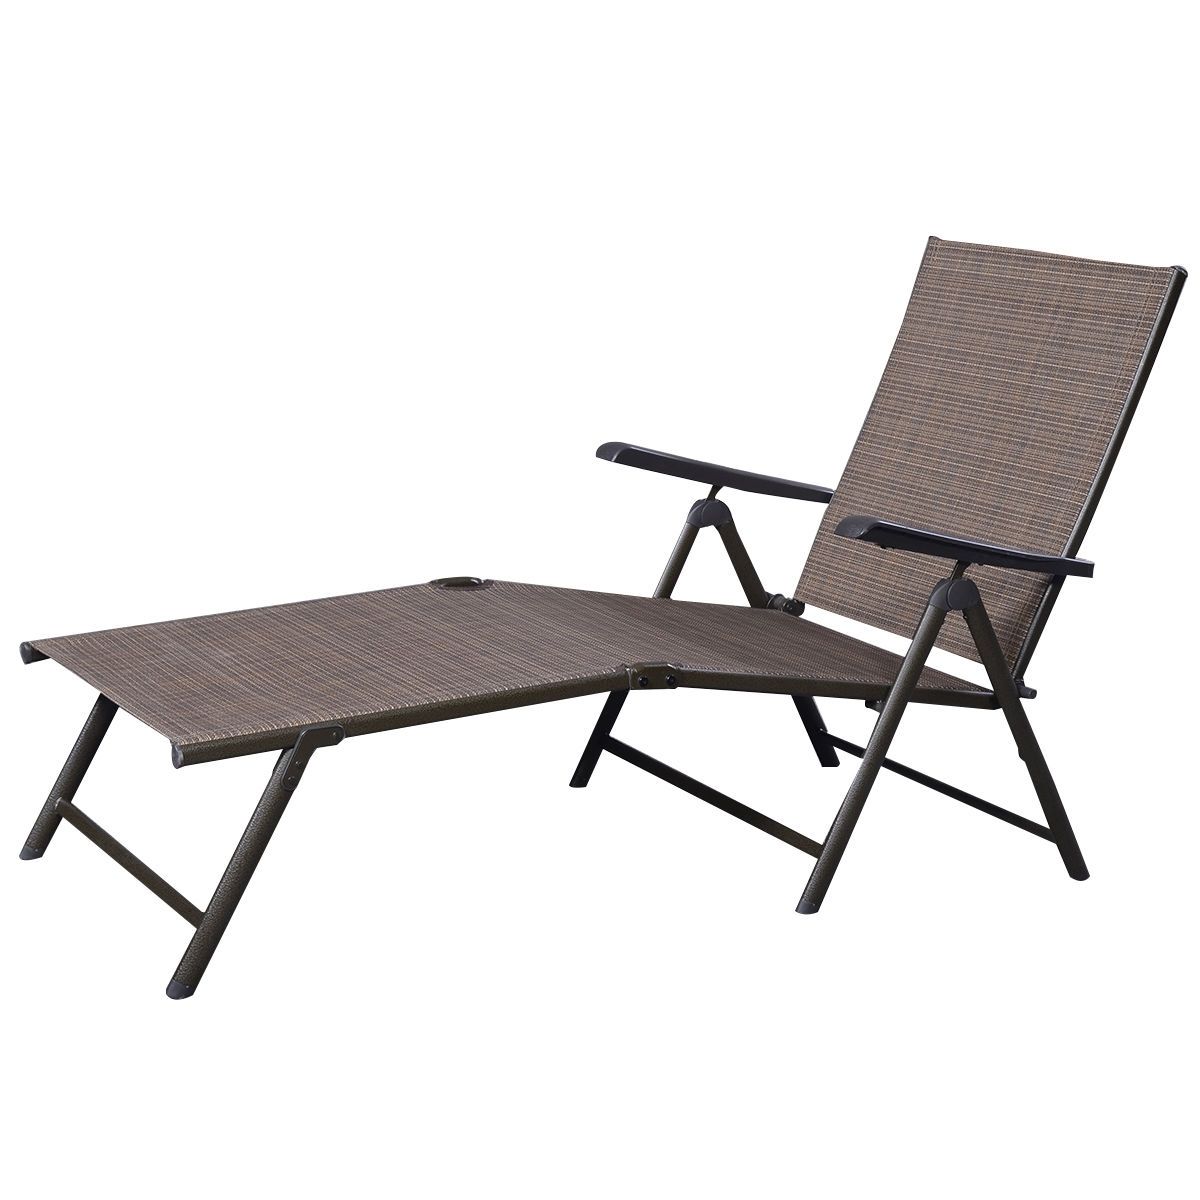 Best And Newest Outdoor Chaise Lounge Chairs Inside Outdoor Adjustable Chaise Lounge Chair – Sunloungers – Outdoor (View 7 of 15)